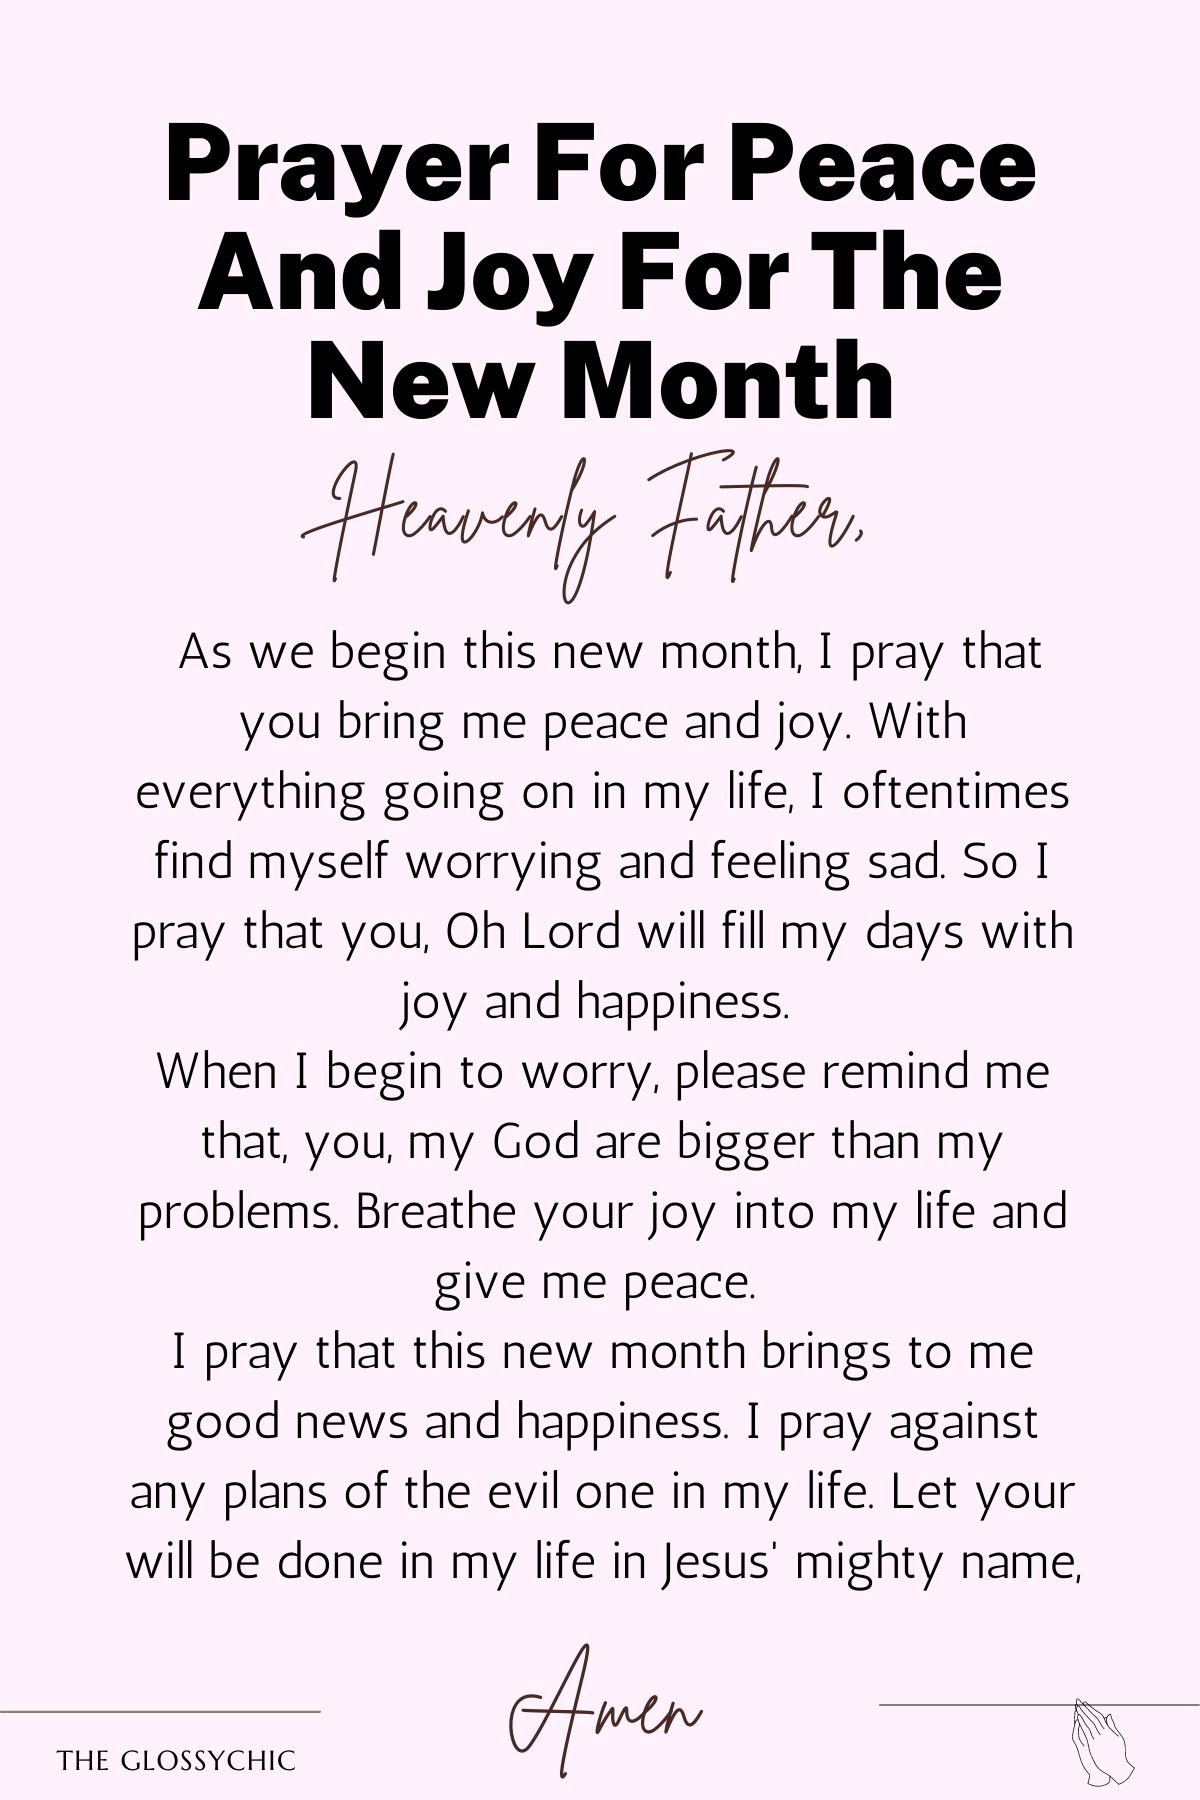 Prayer For Peace And Joy For The New Month